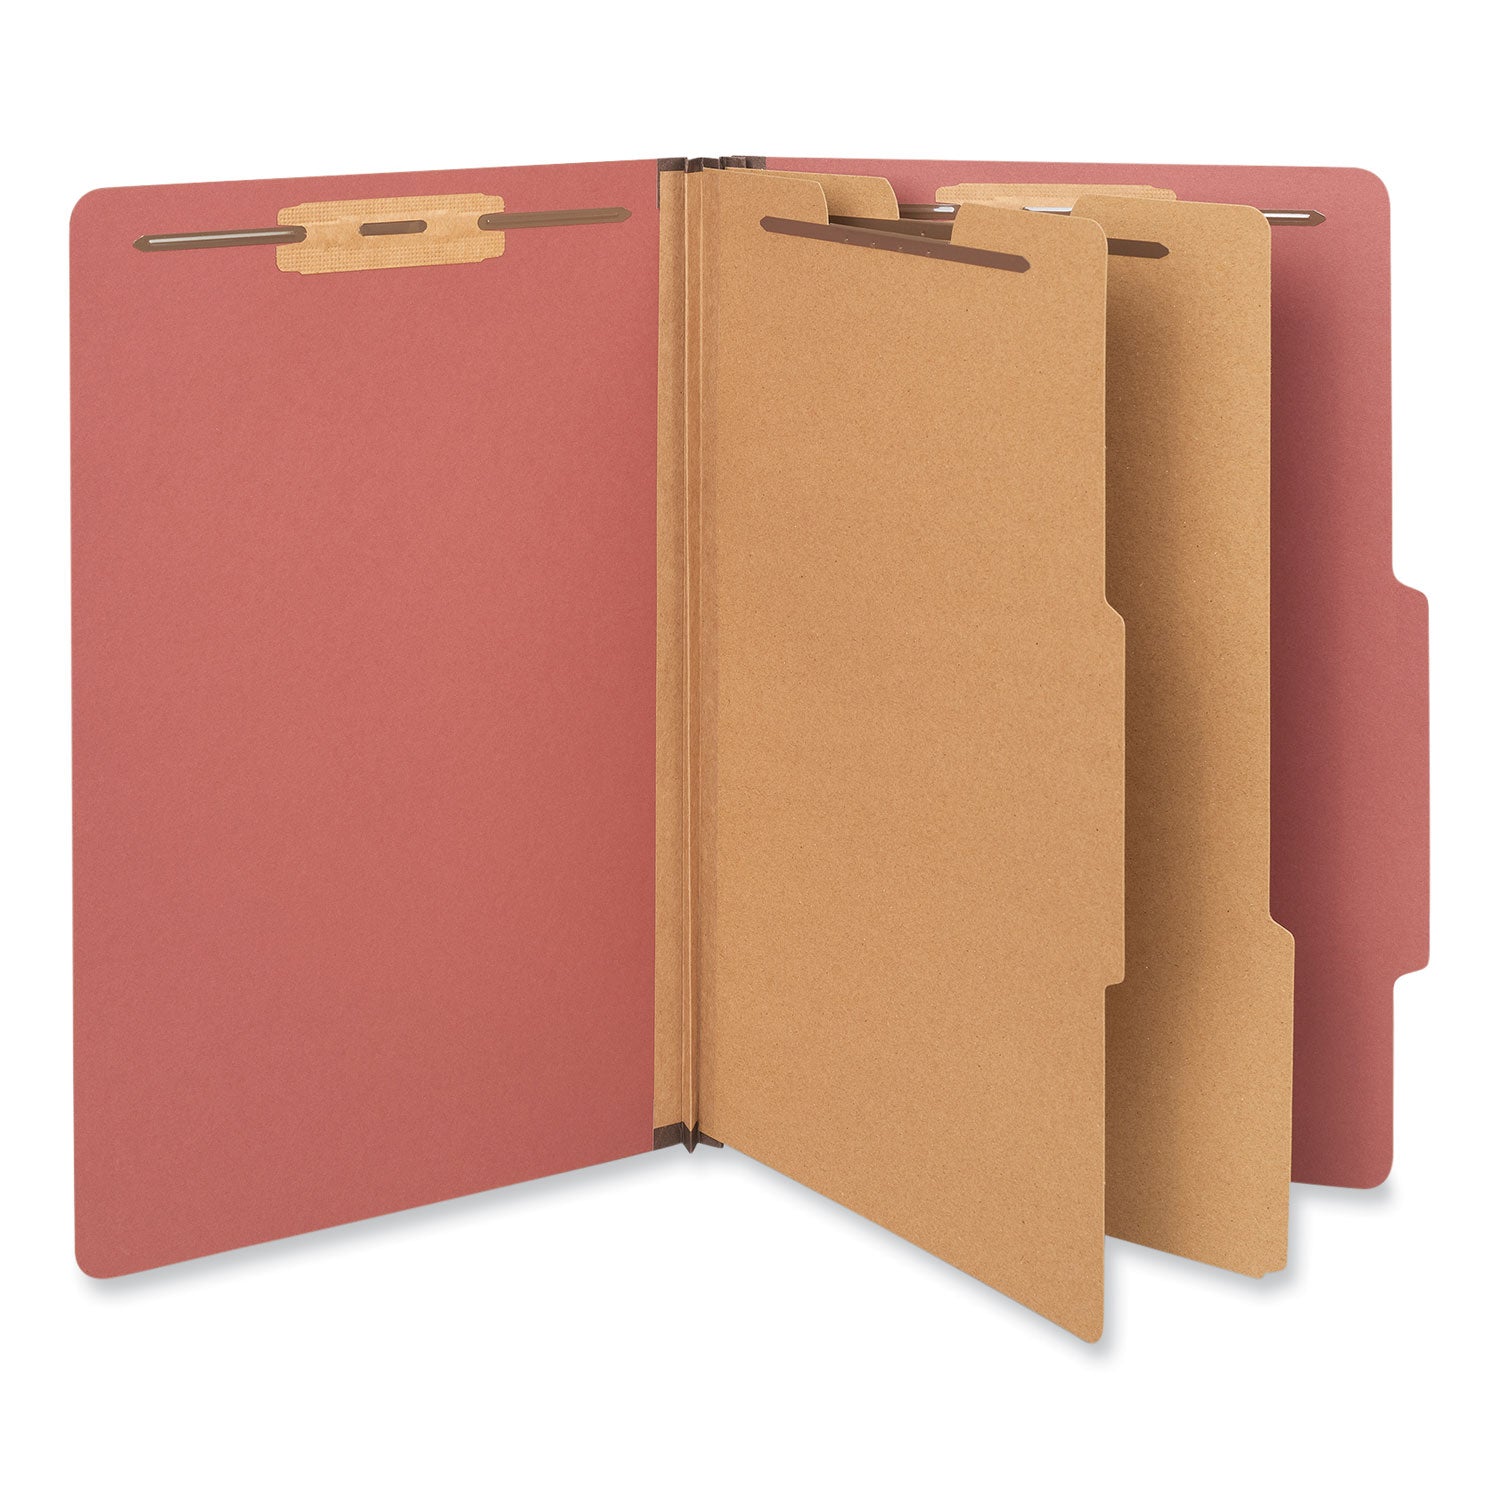 six-section-classification-folders-heavy-duty-pressboard-cover-2-dividers-6-fasteners-legal-size-brick-red-20-box_unv10403 - 1